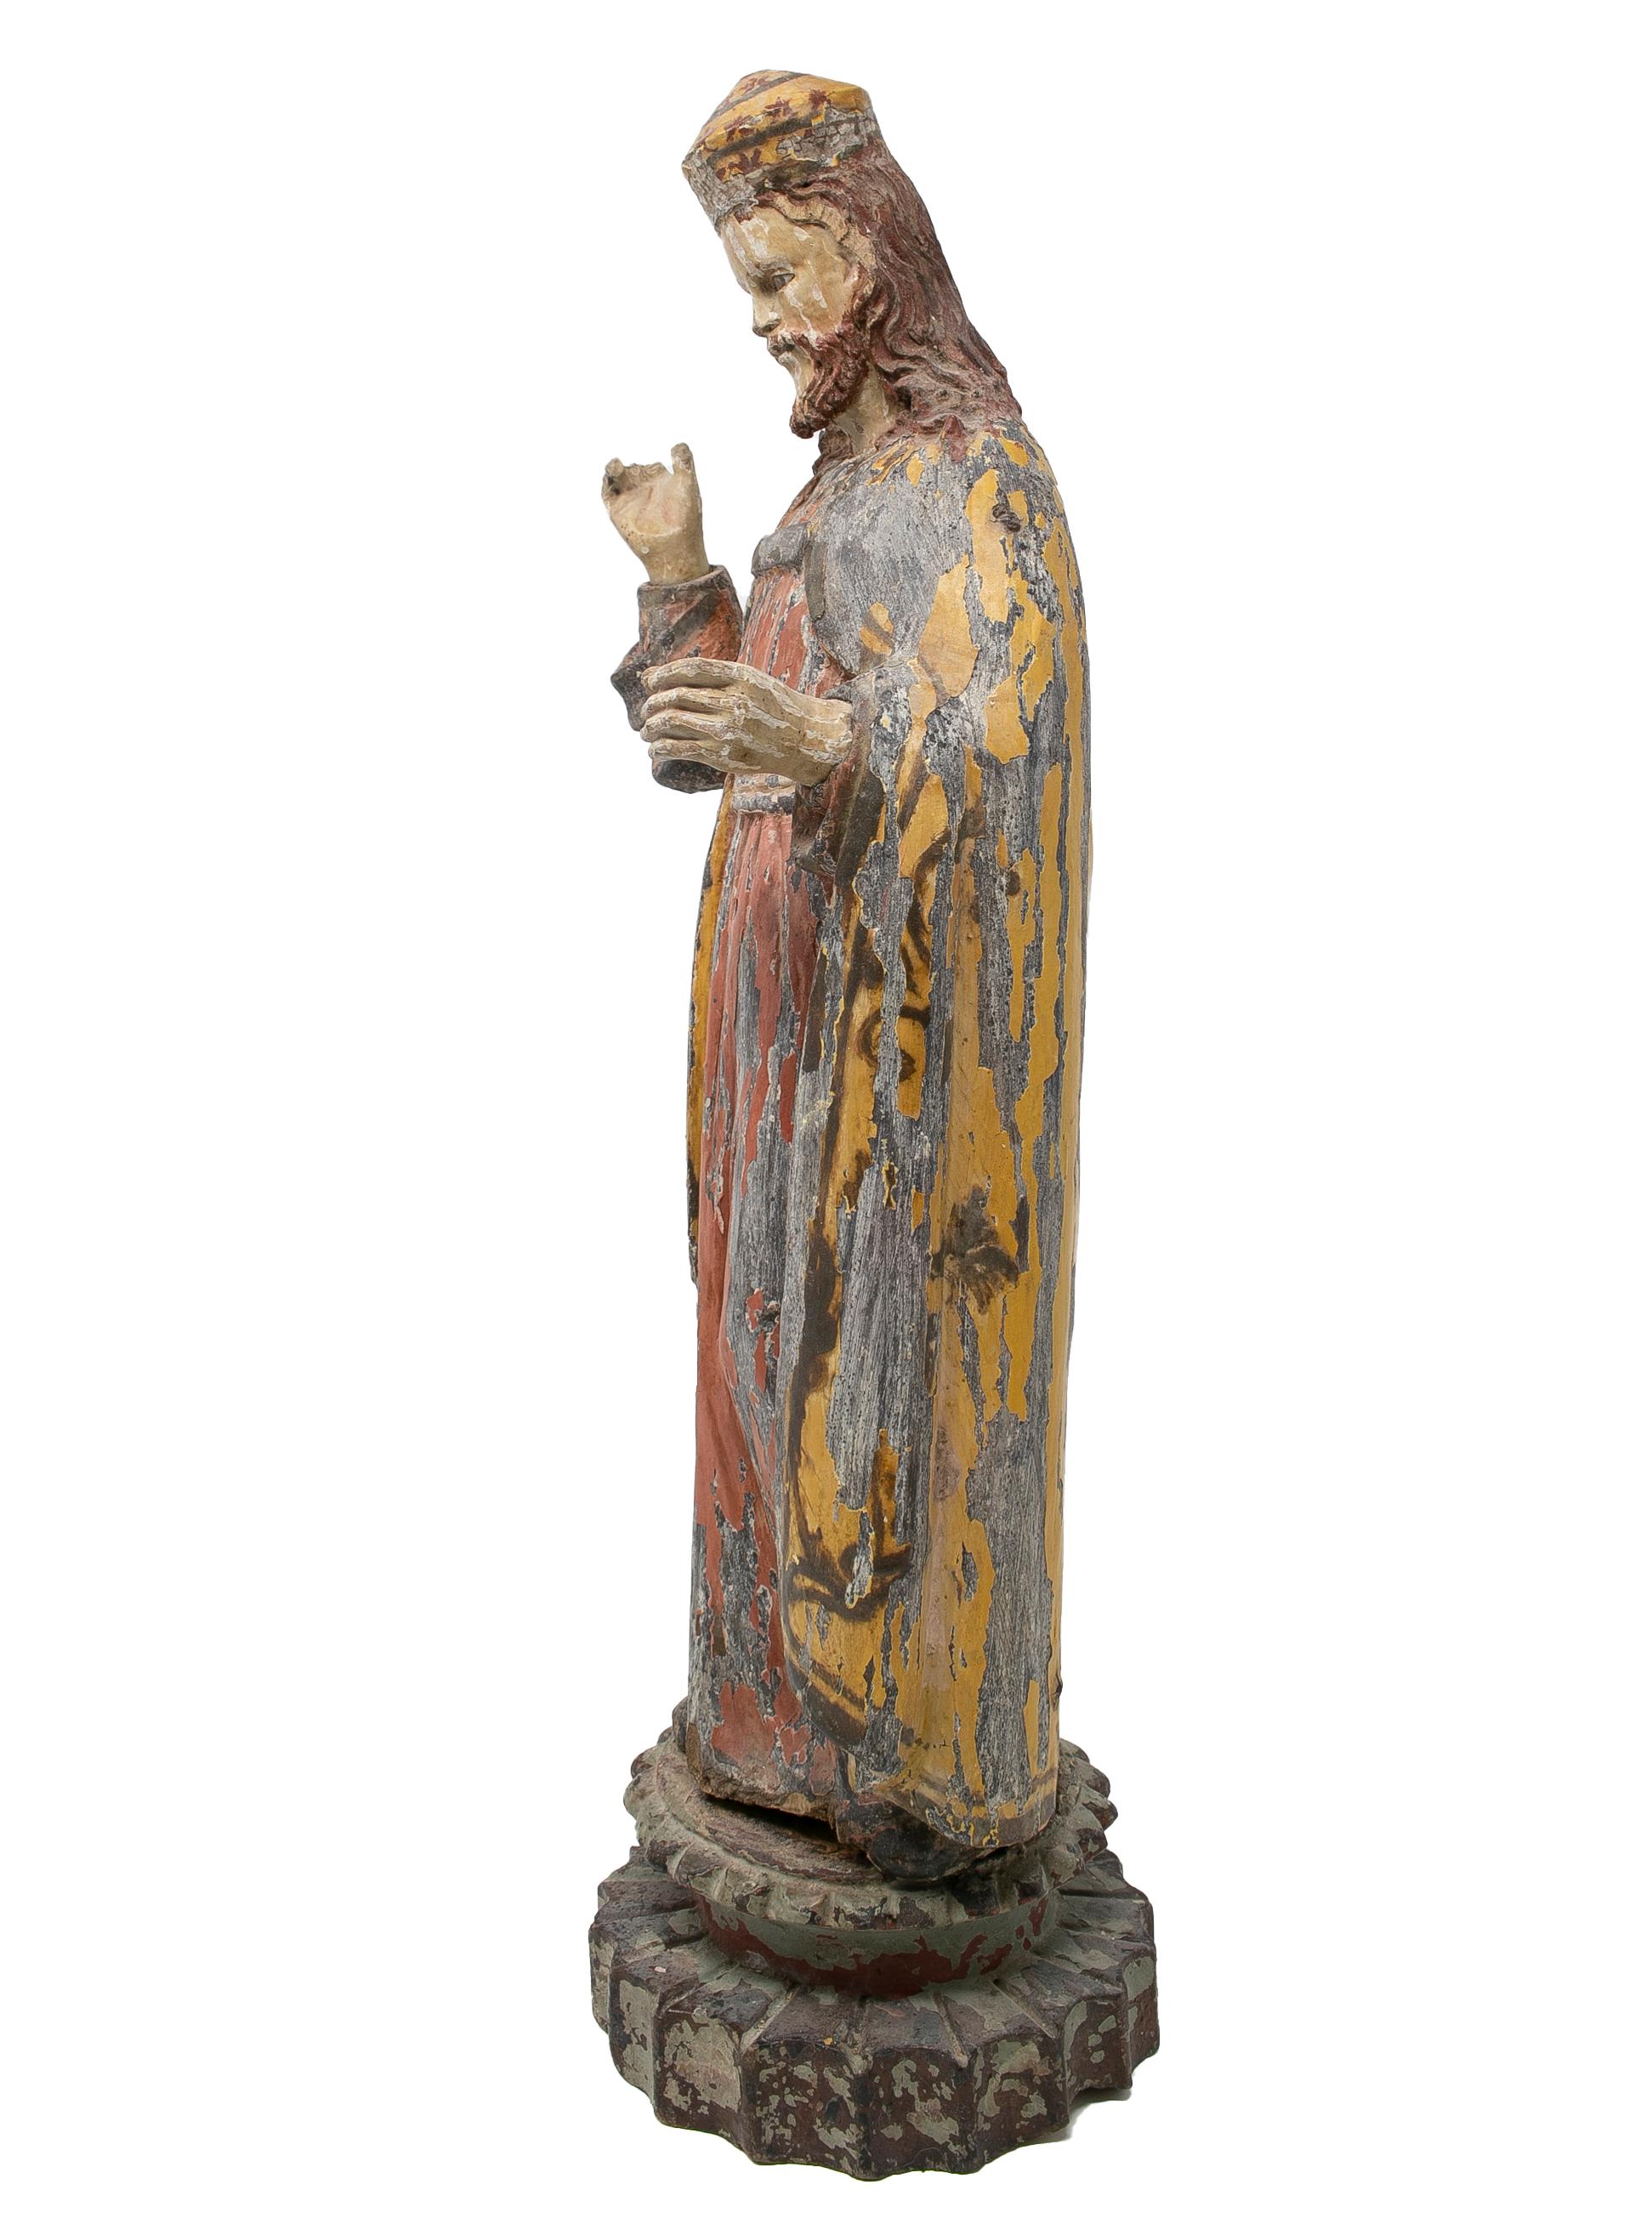 Hand-Carved Mid-19th Century Spanish Saint Painted Wooden Figurative Sculpture For Sale